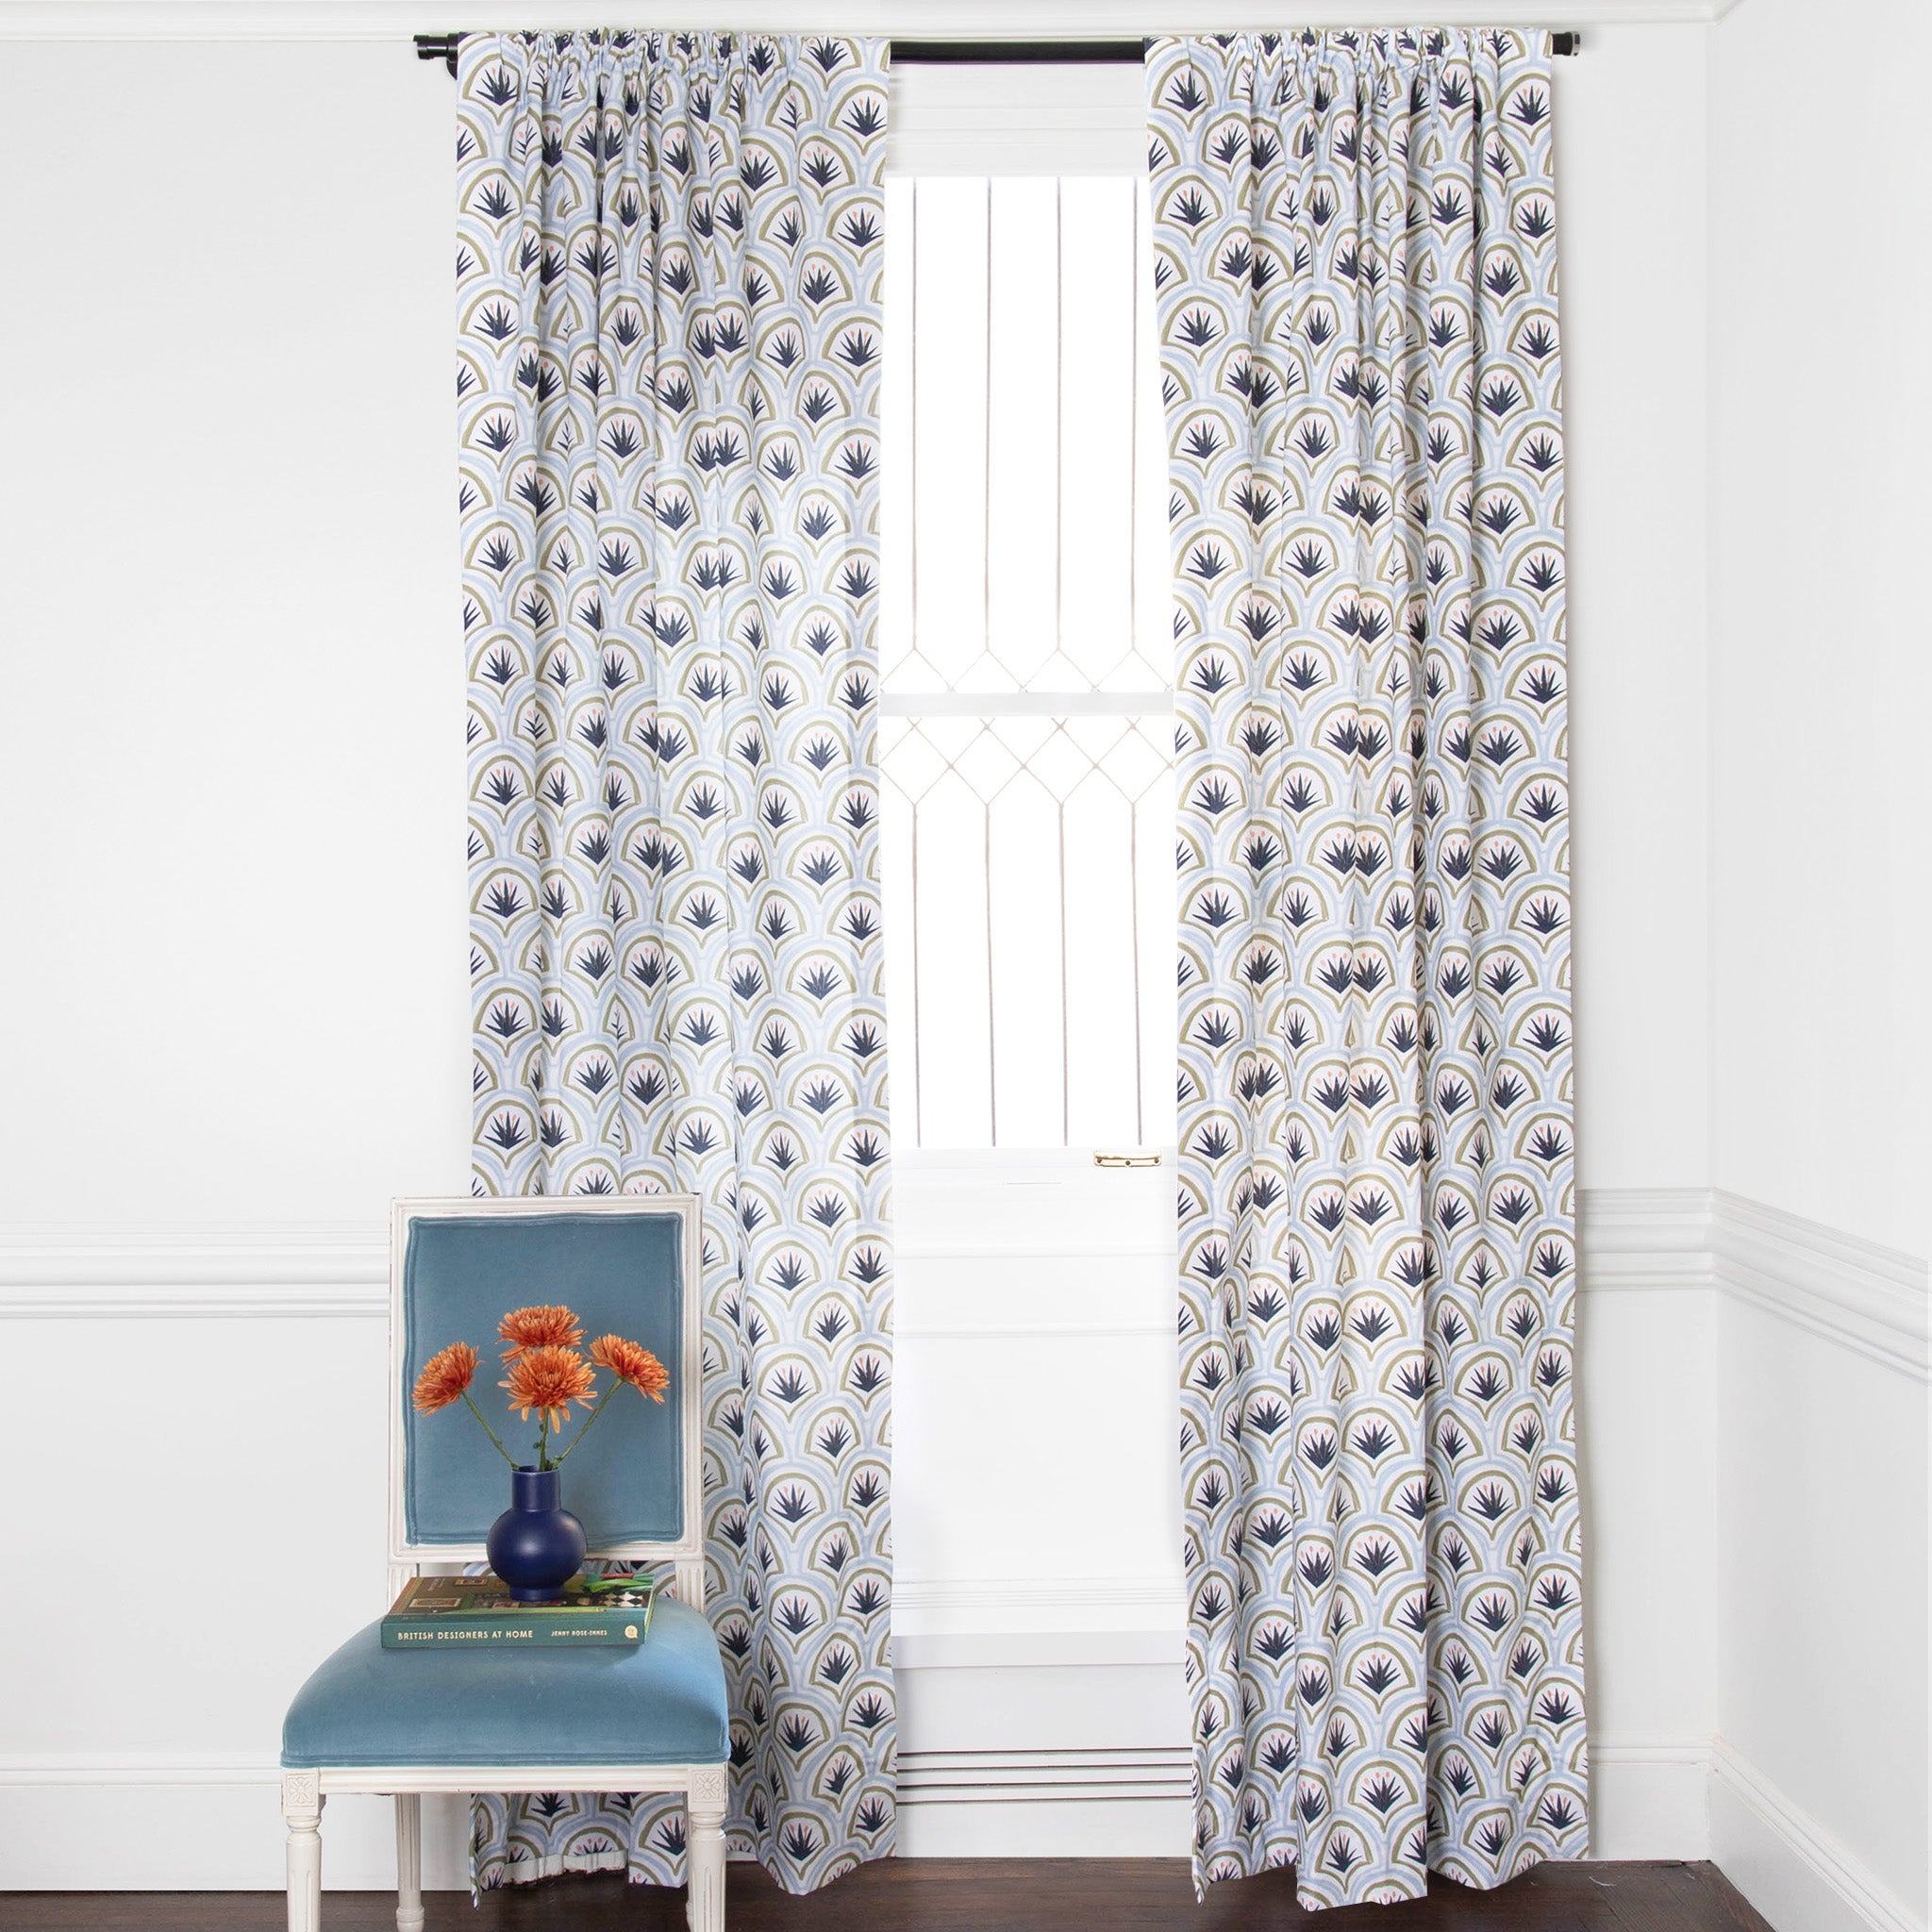 Art Deco Palm Pattern Printed Curtains on white rod in front of an illuminated window with Blue Velvet chair with orange flowers in blue vase on top of green book